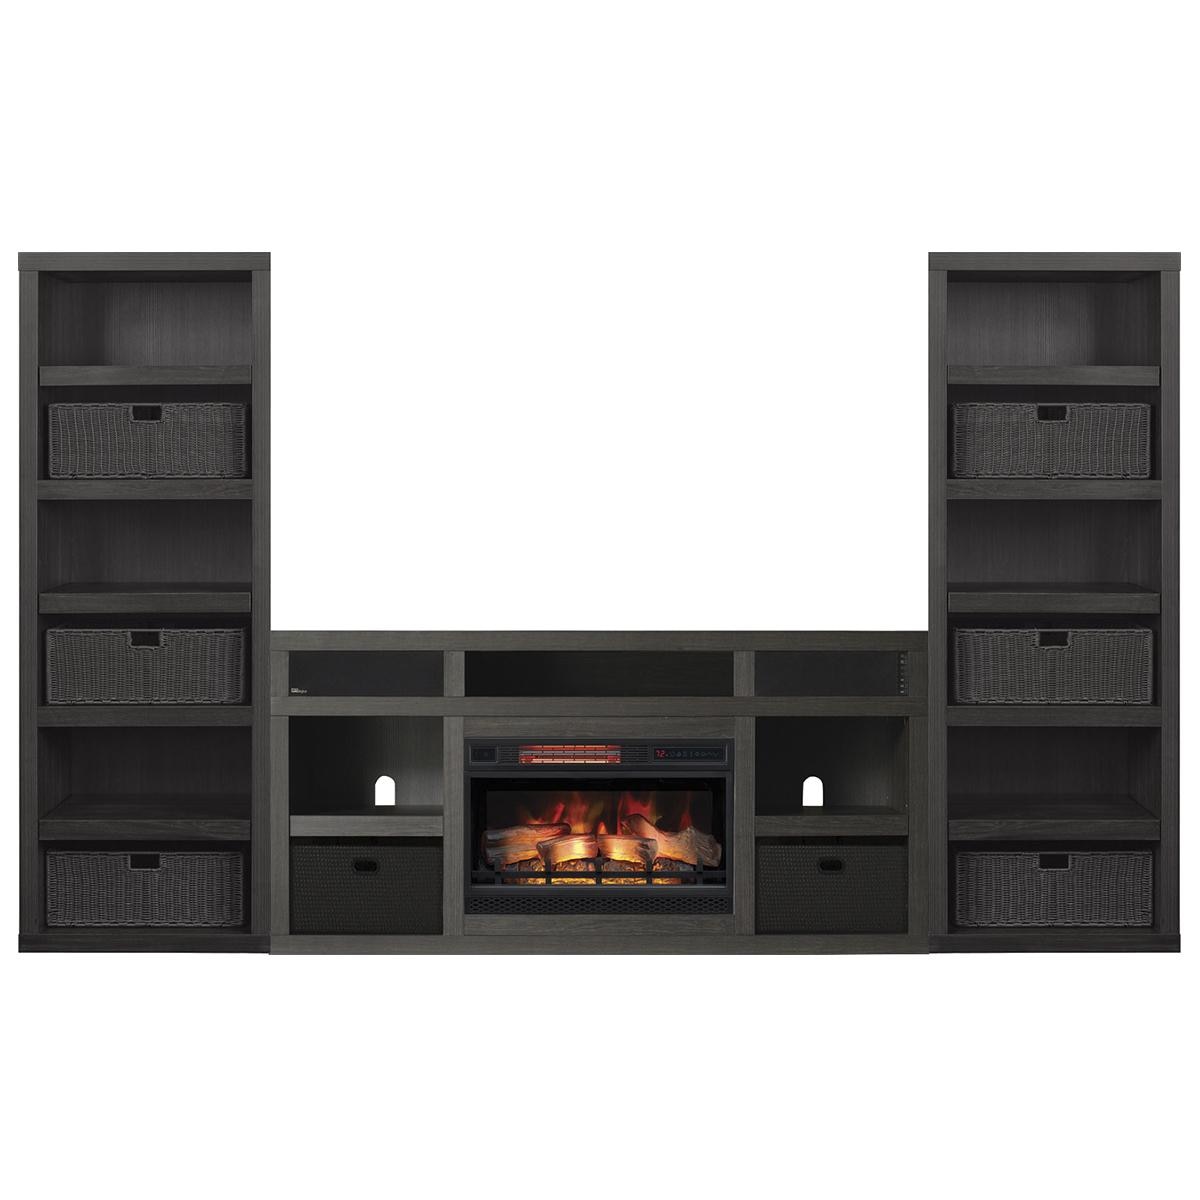 50 Tv Stand with Fireplace Awesome Fabio Flames Greatlin 3 Piece Fireplace Entertainment Wall